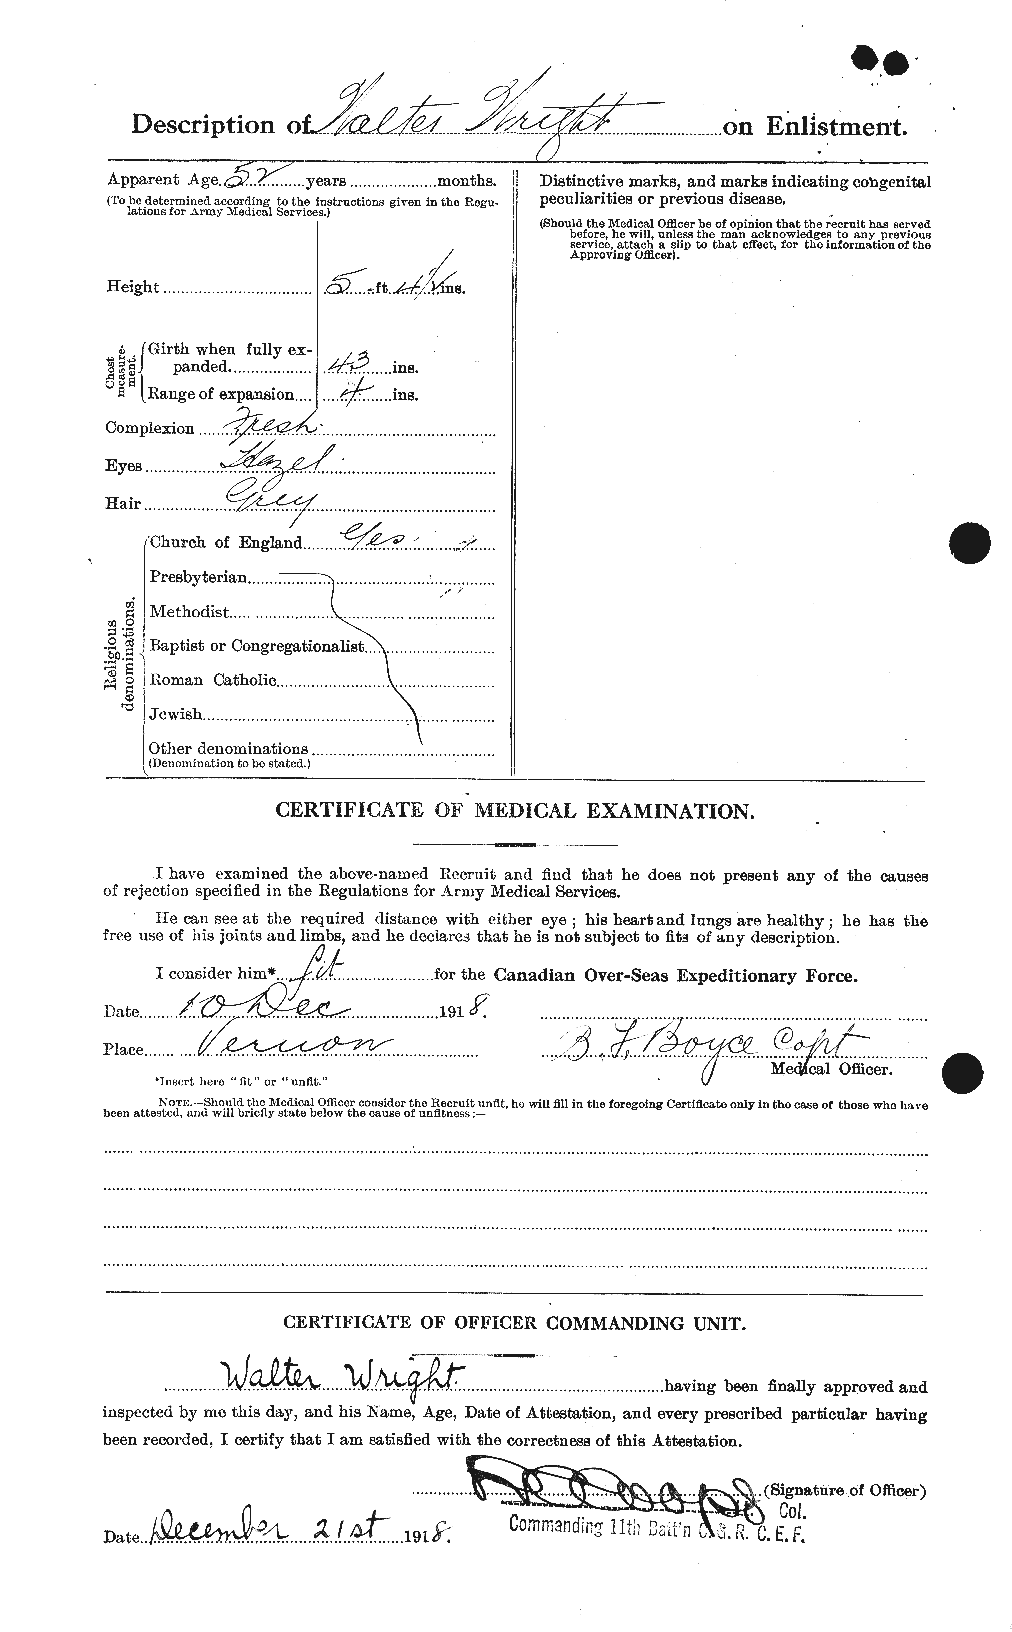 Personnel Records of the First World War - CEF 688632b